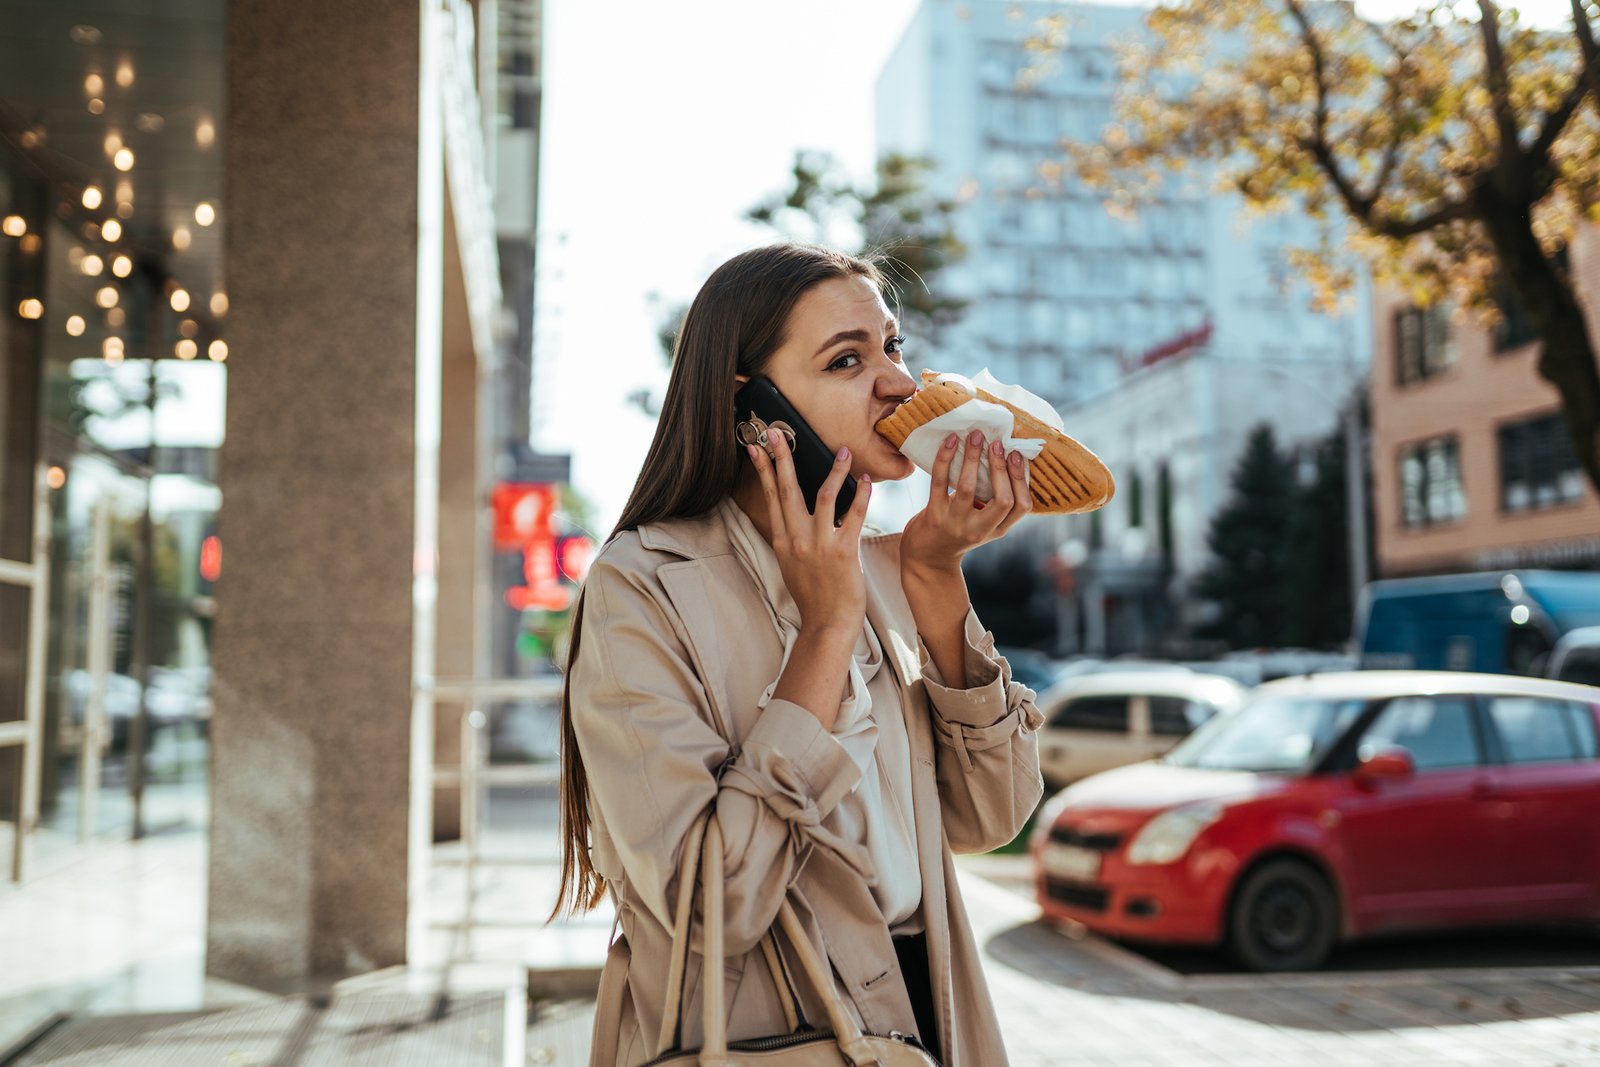 Stressed office woman eating on the way and talking on the phone outside